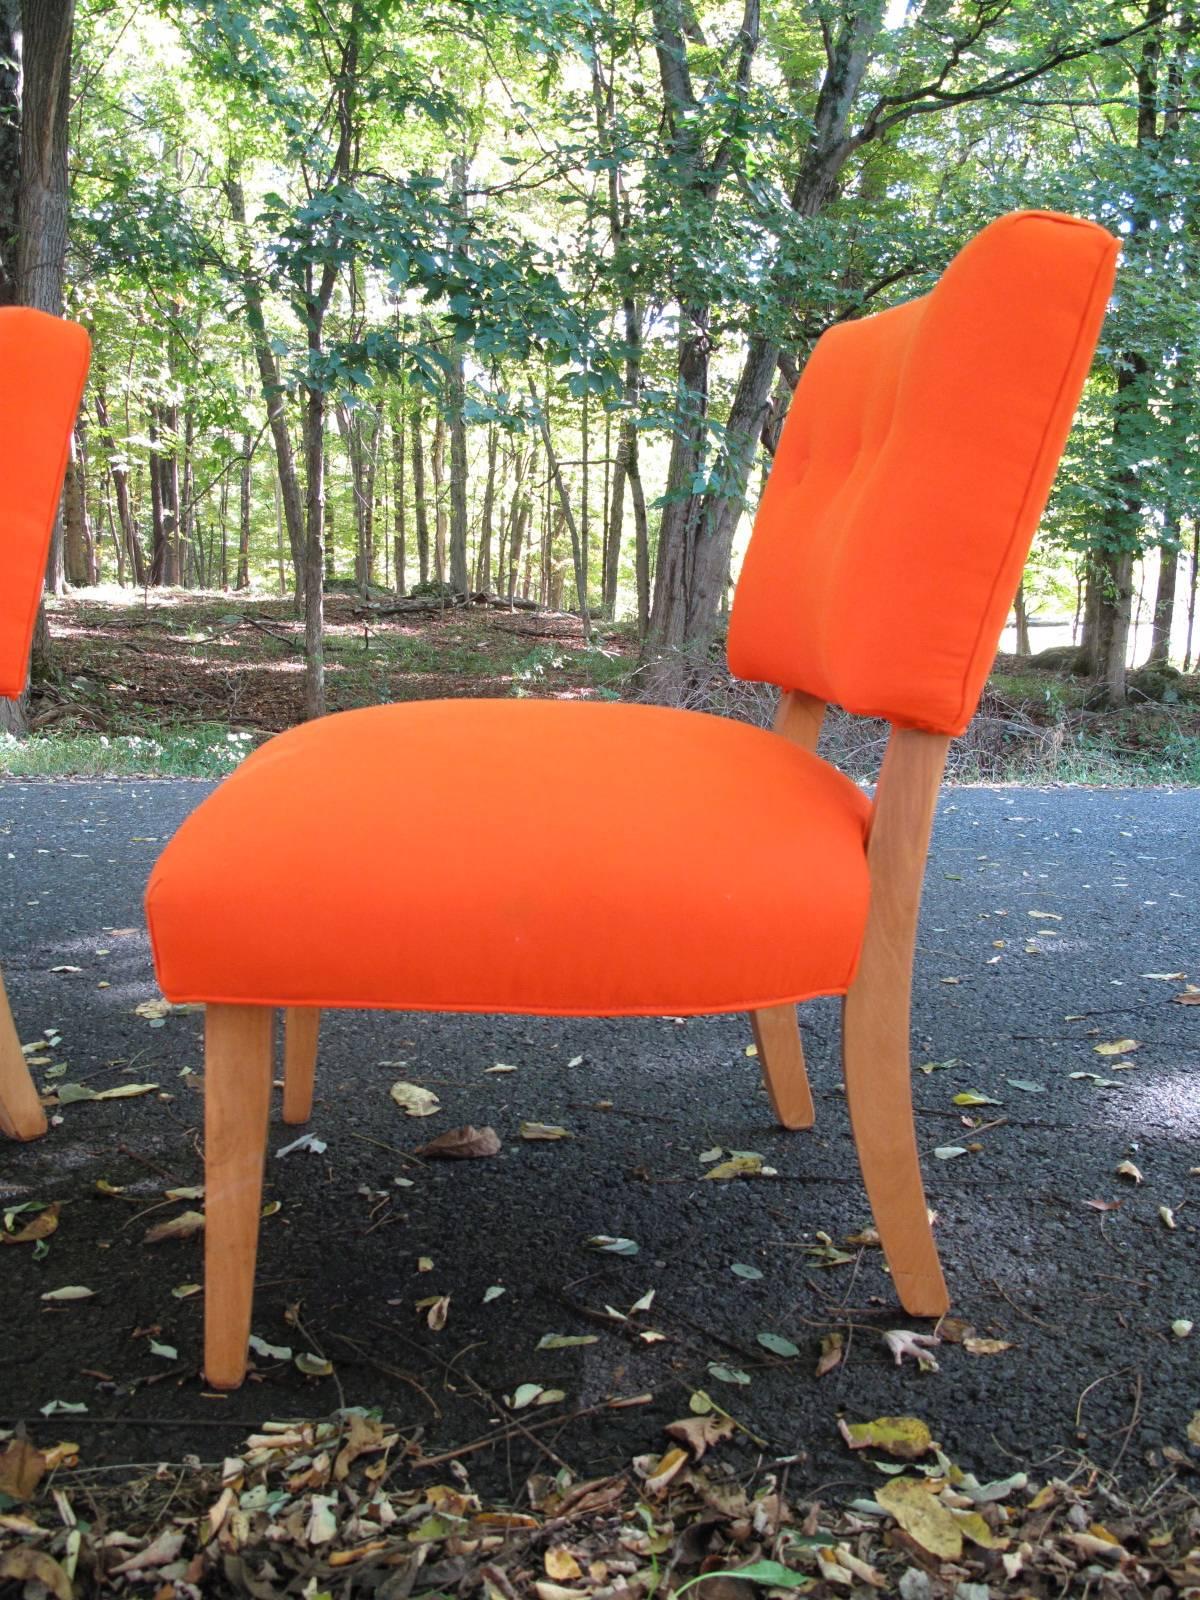 Two button-tufted Mid-Century Modern armless chairs. Recently upholstered in electric orange cotton.